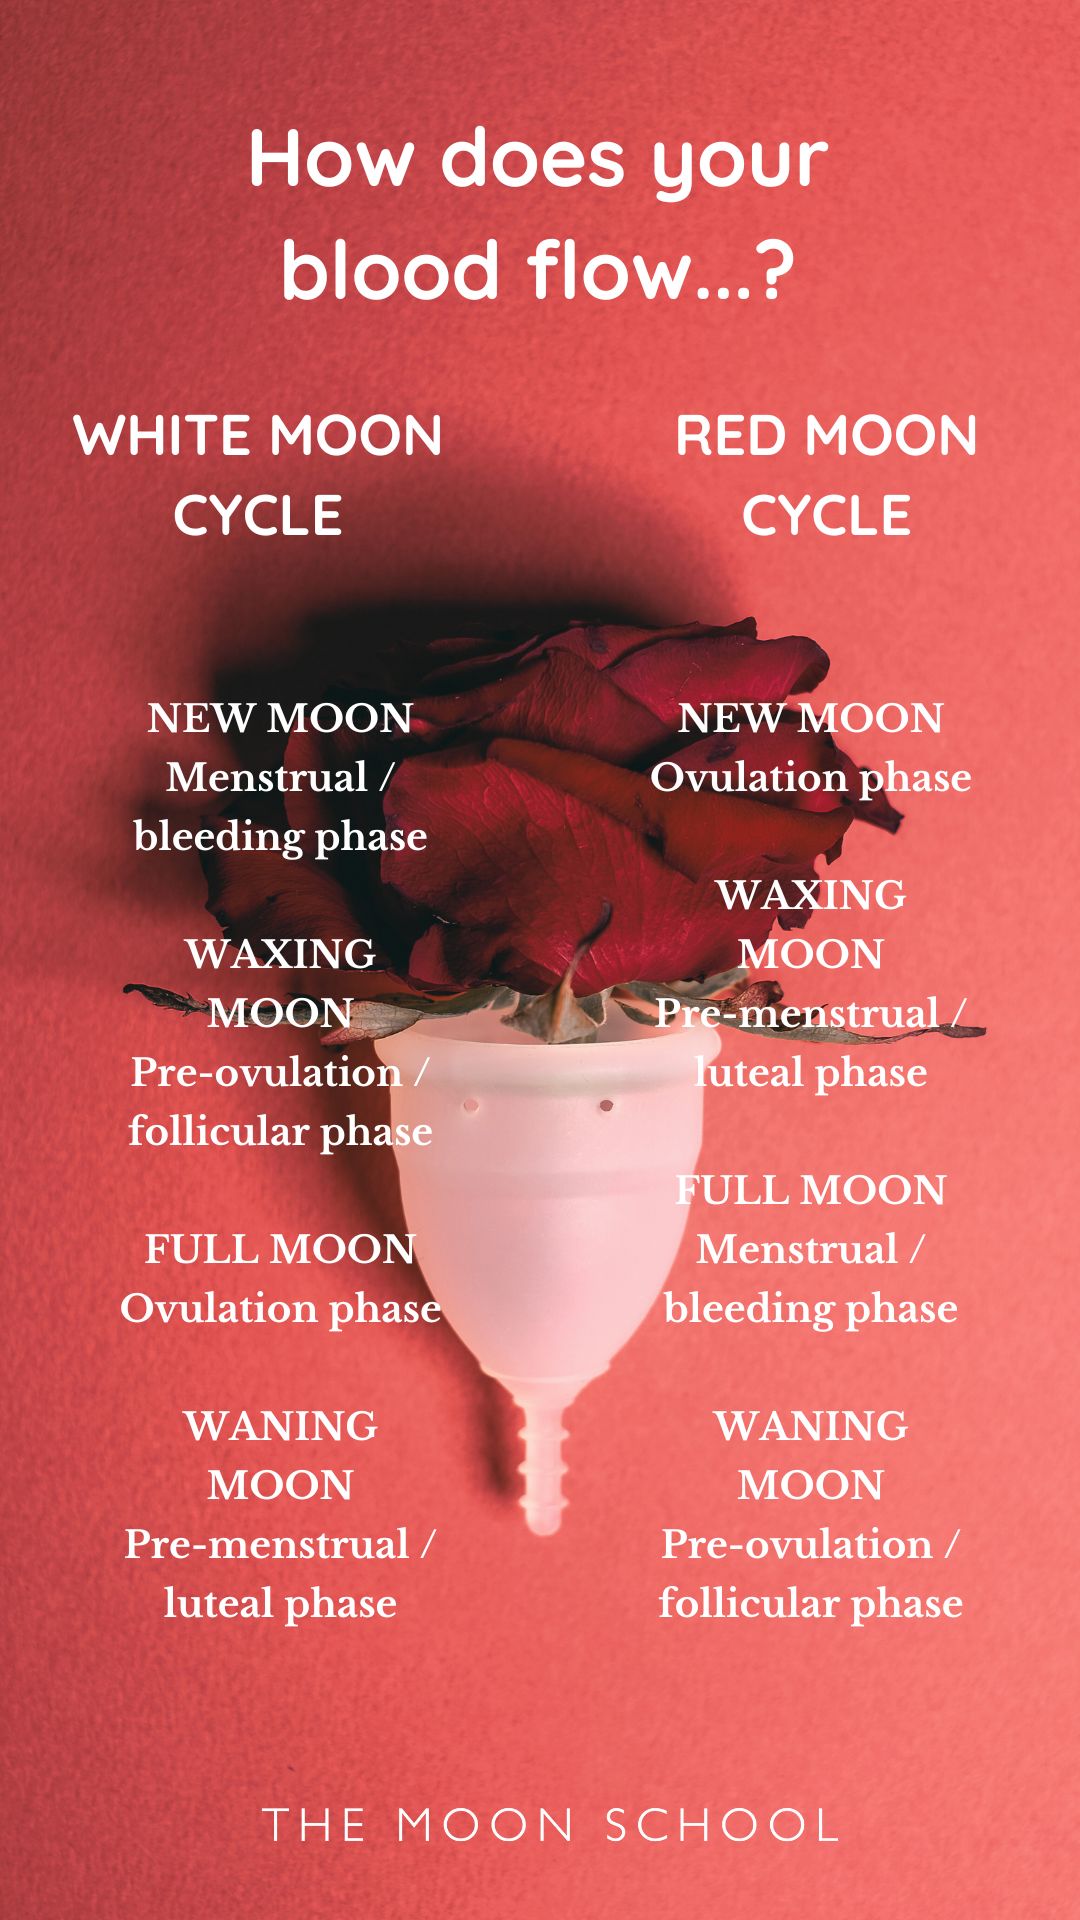 Red Moon cycle and White Moon cycle infographic